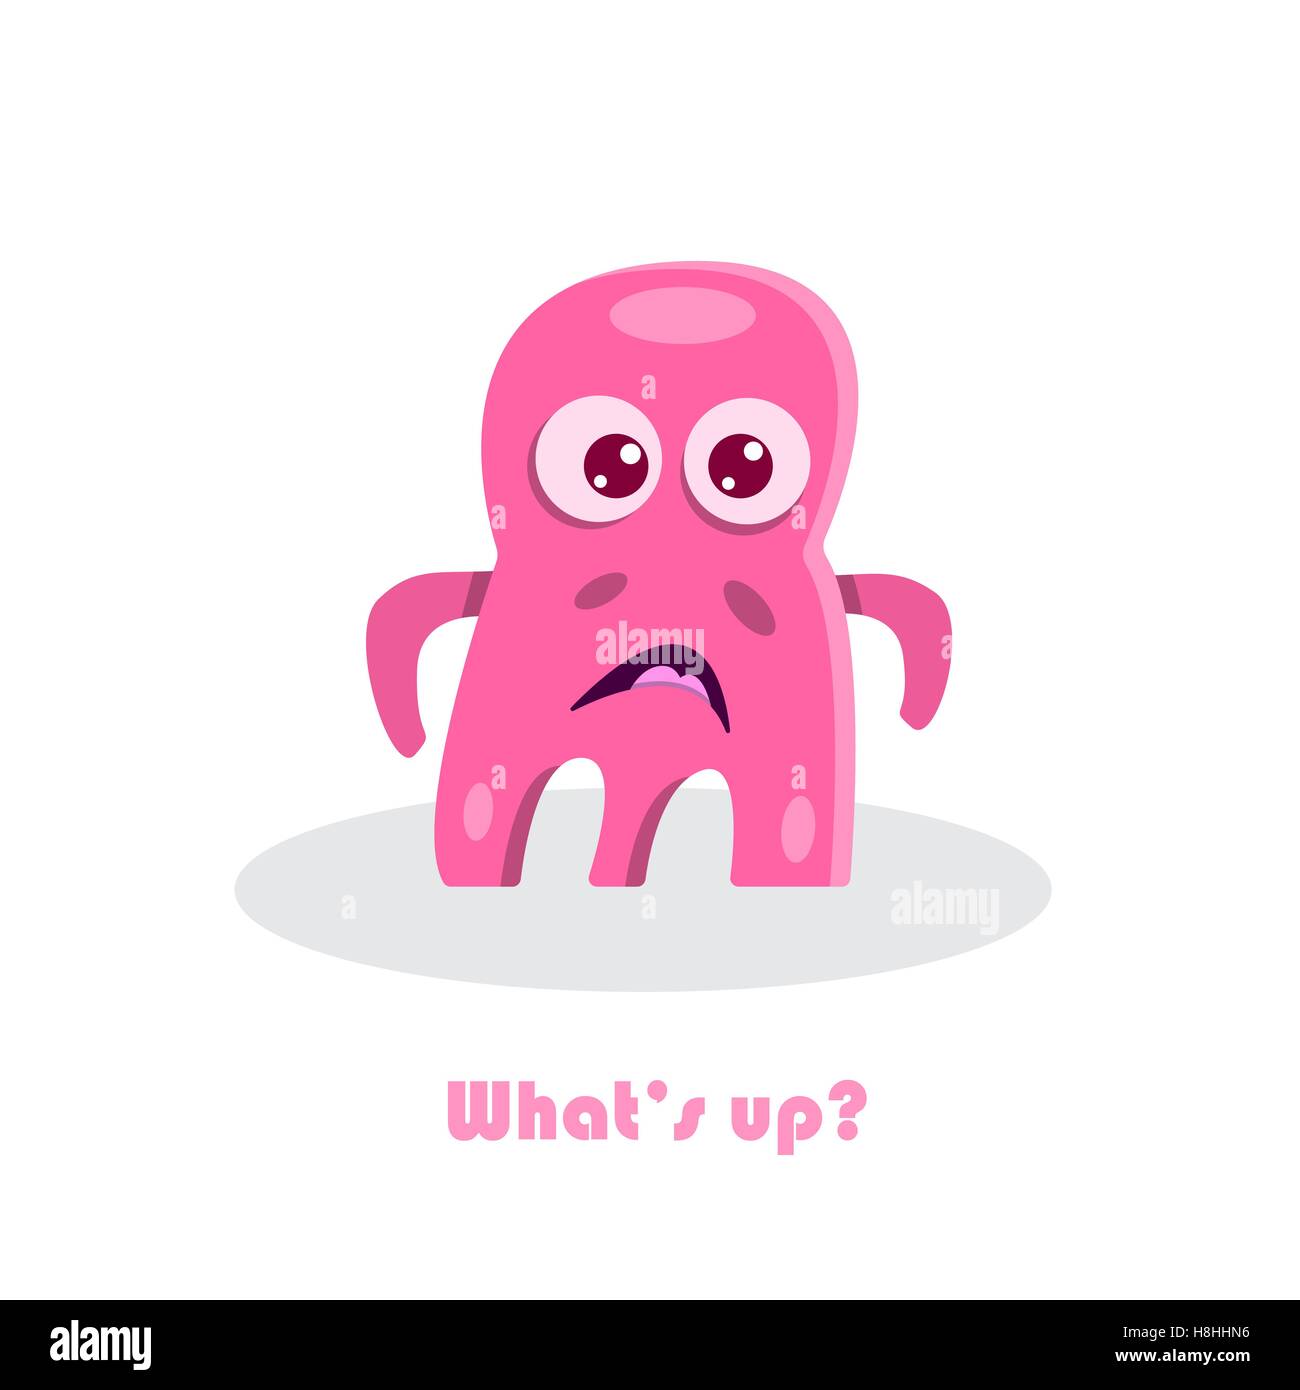 Whats up? text with funny monster. Scared comic funny pink cartoon beast. Cute kid drawing. Humor vector illustration. Stock Vector